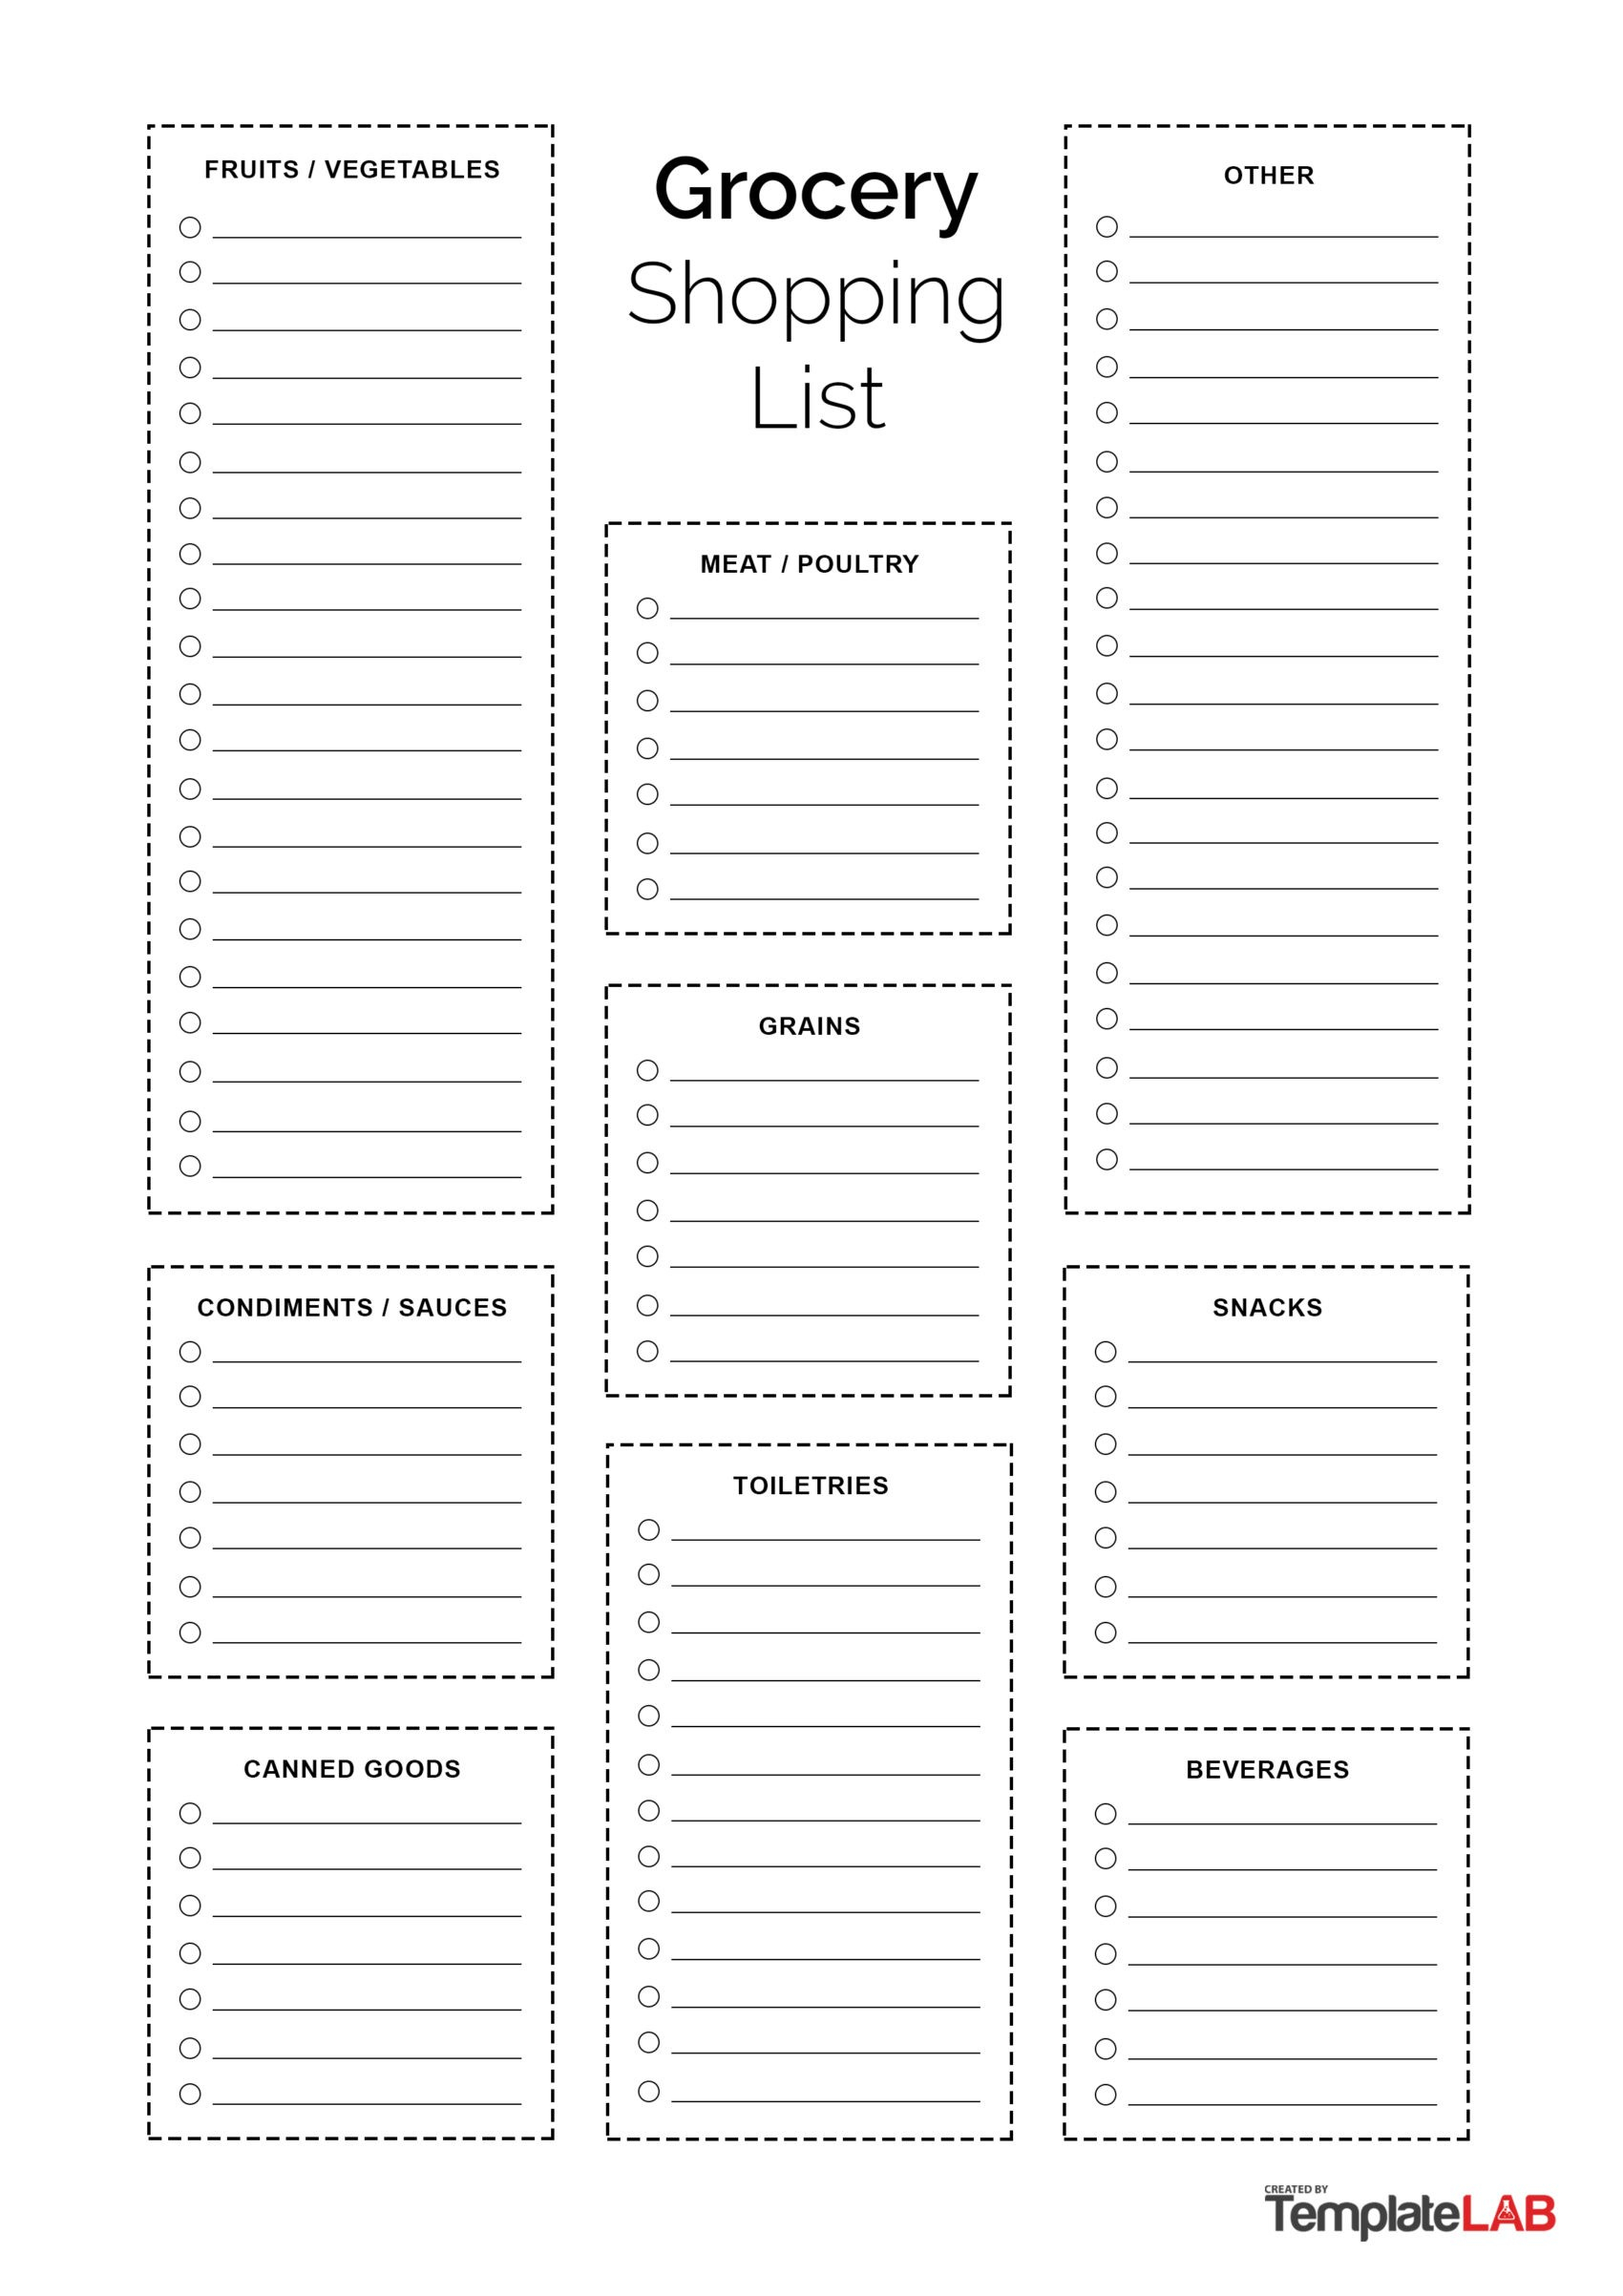 10+ Printable Grocery List Templates (Shopping List) ᐅ TemplateLab In Grocery Store Checklist Template Pertaining To Grocery Store Checklist Template